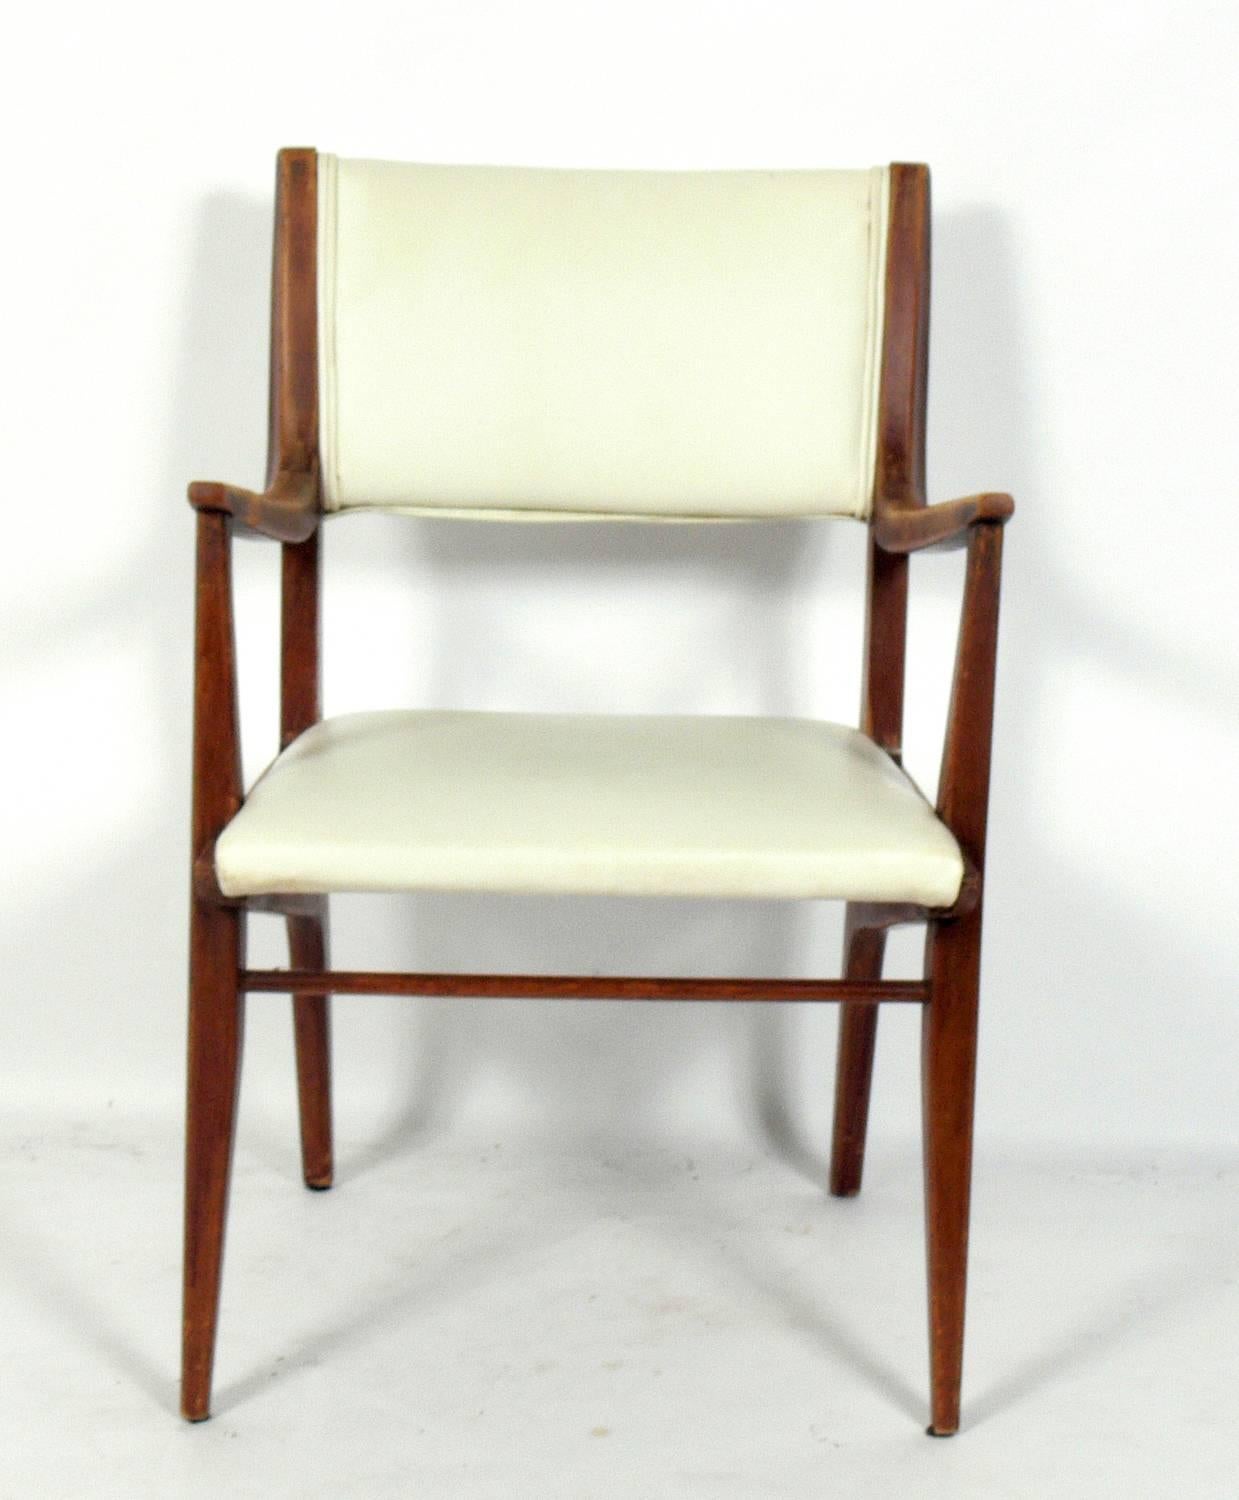 Curvaceous Mid-Century Modern dining chairs, designed by John Van Koert for Drexel, American, circa 1950s. These chairs are currently being refinished and reupholstered and can be completed in your choice of finish color and in your fabric. The